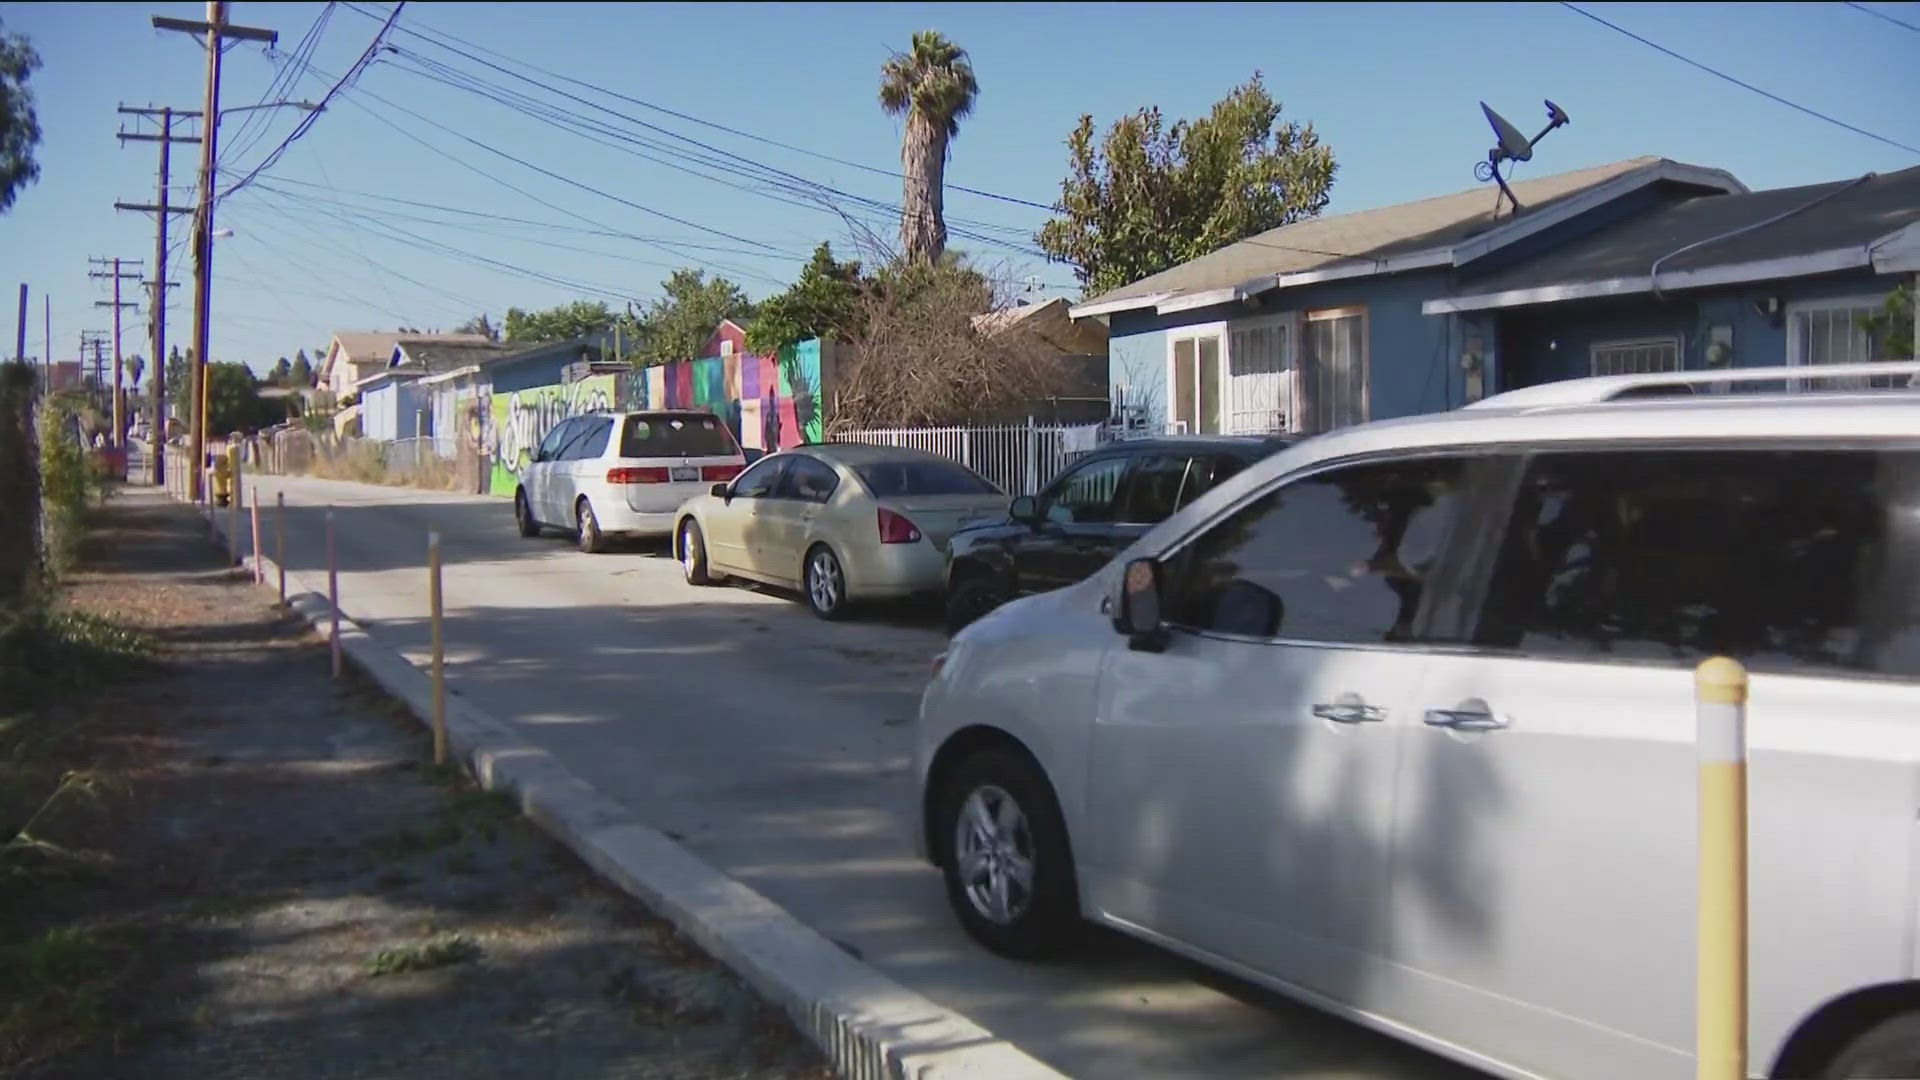 Residents have said for years the narrow alley along Cypress Drive is dangerous for pedestrians and cars squeezing their way through.